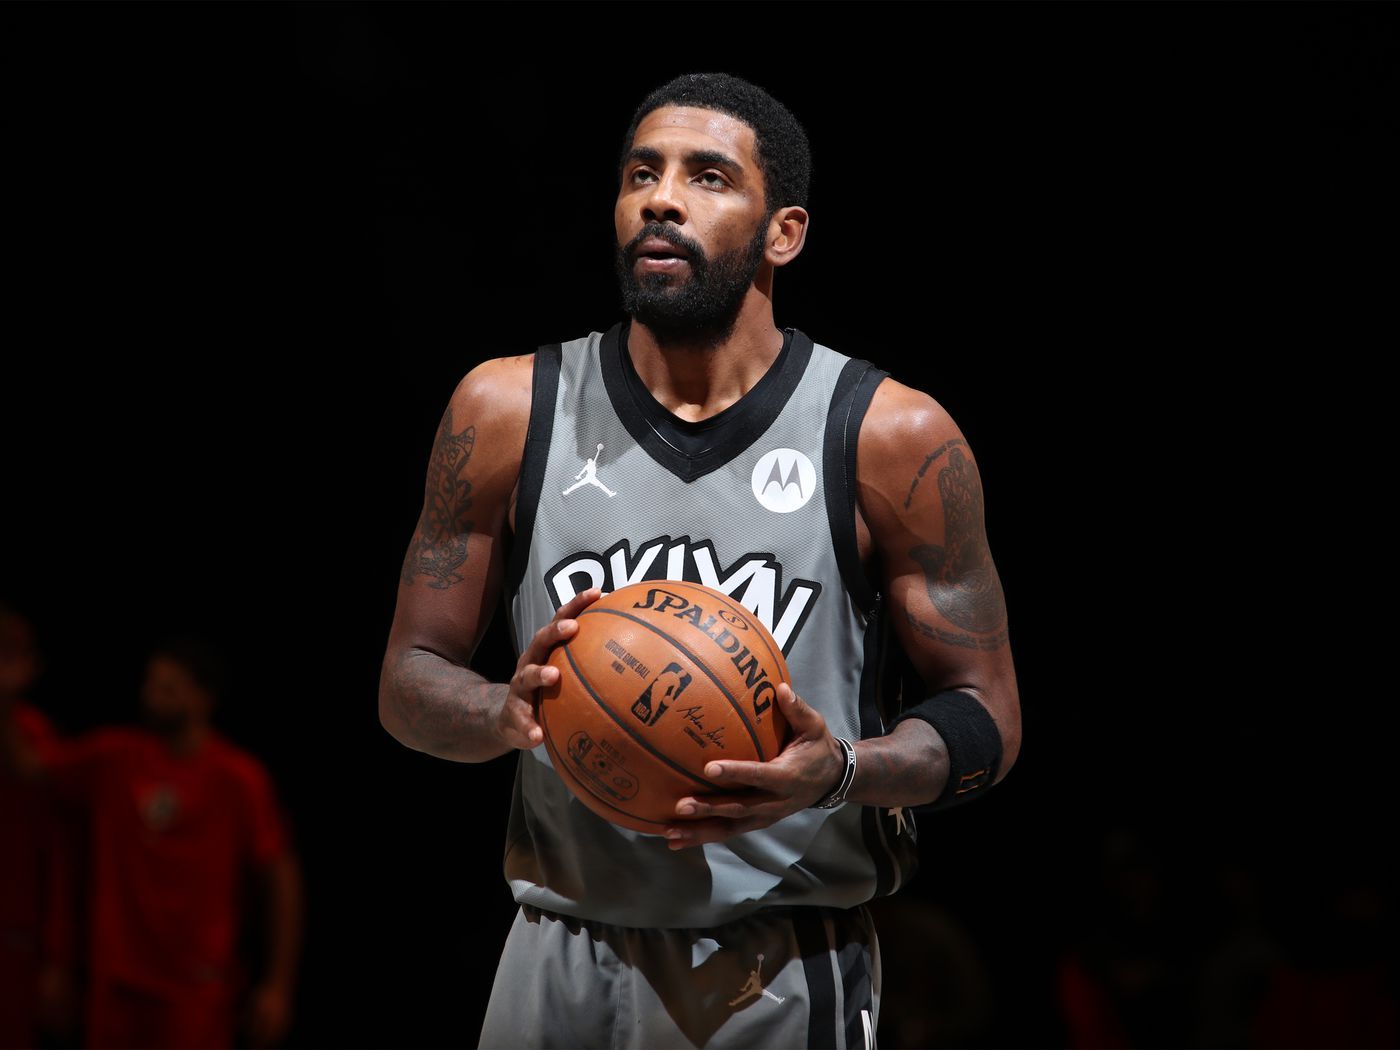 New video of Kyrie Irving makes the rounds. what does it mean?